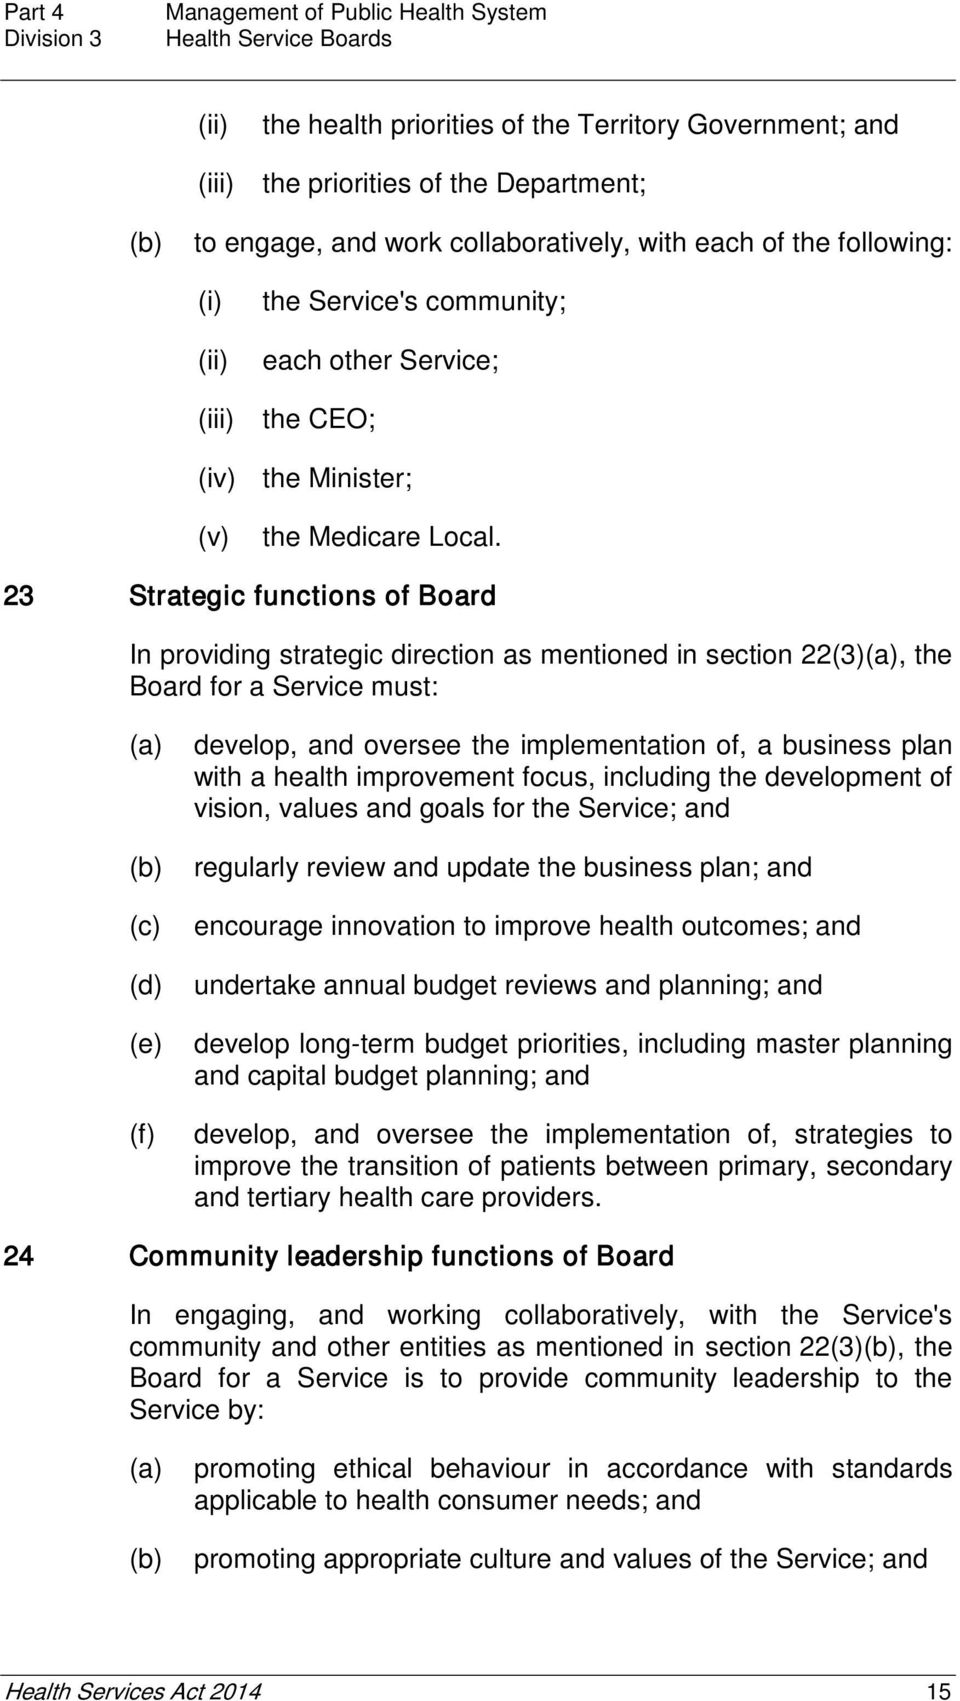 23 Strategic functions of Board In providing strategic direction as mentioned in section 22(3), the Board for a Service must: (d) (e) (f) develop, and oversee the implementation of, a business plan